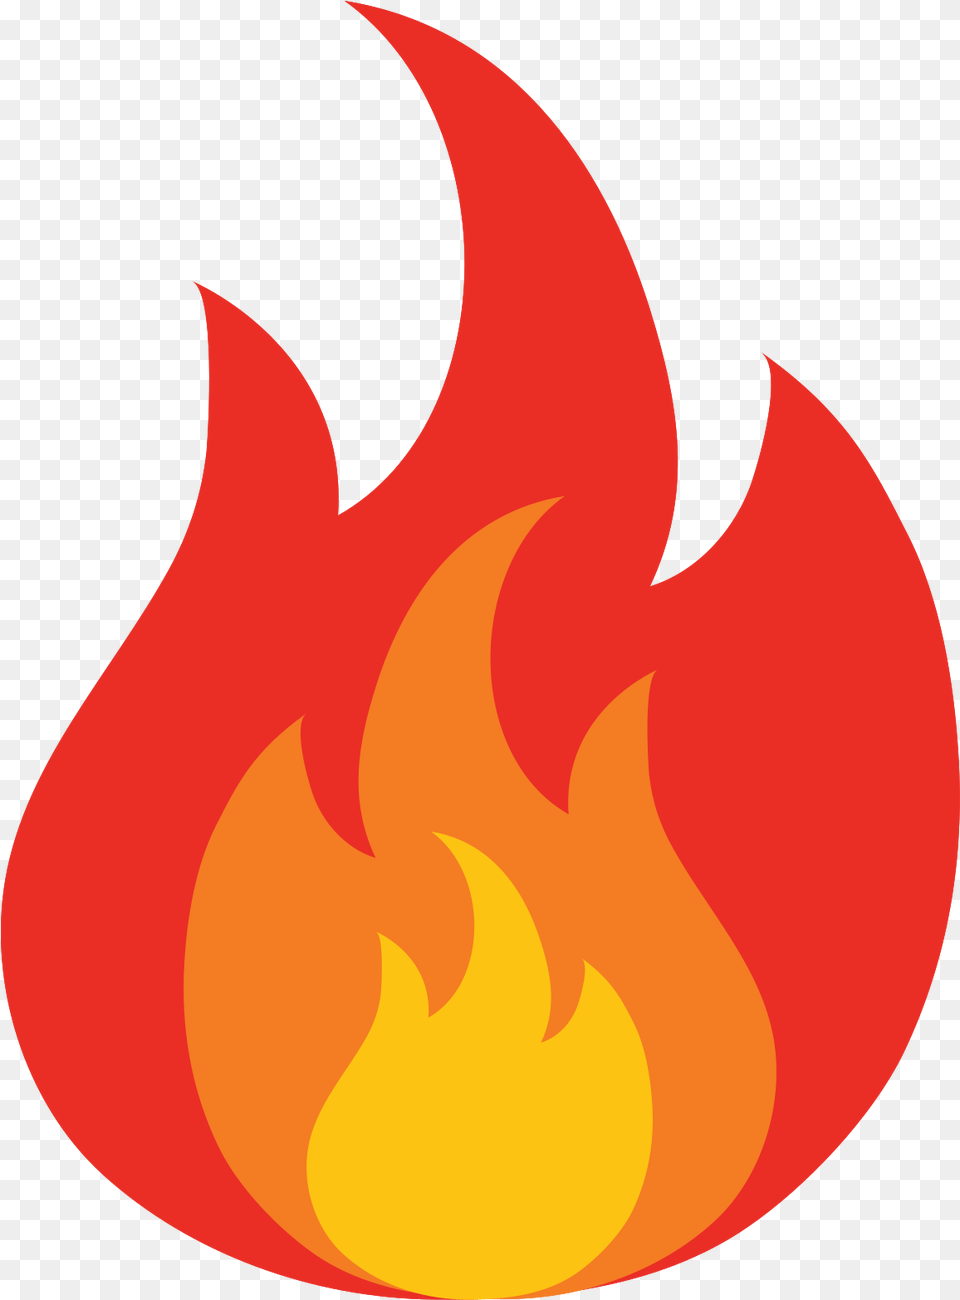 Fire With Transparent Background Fire Flat Design, Flame Free Png